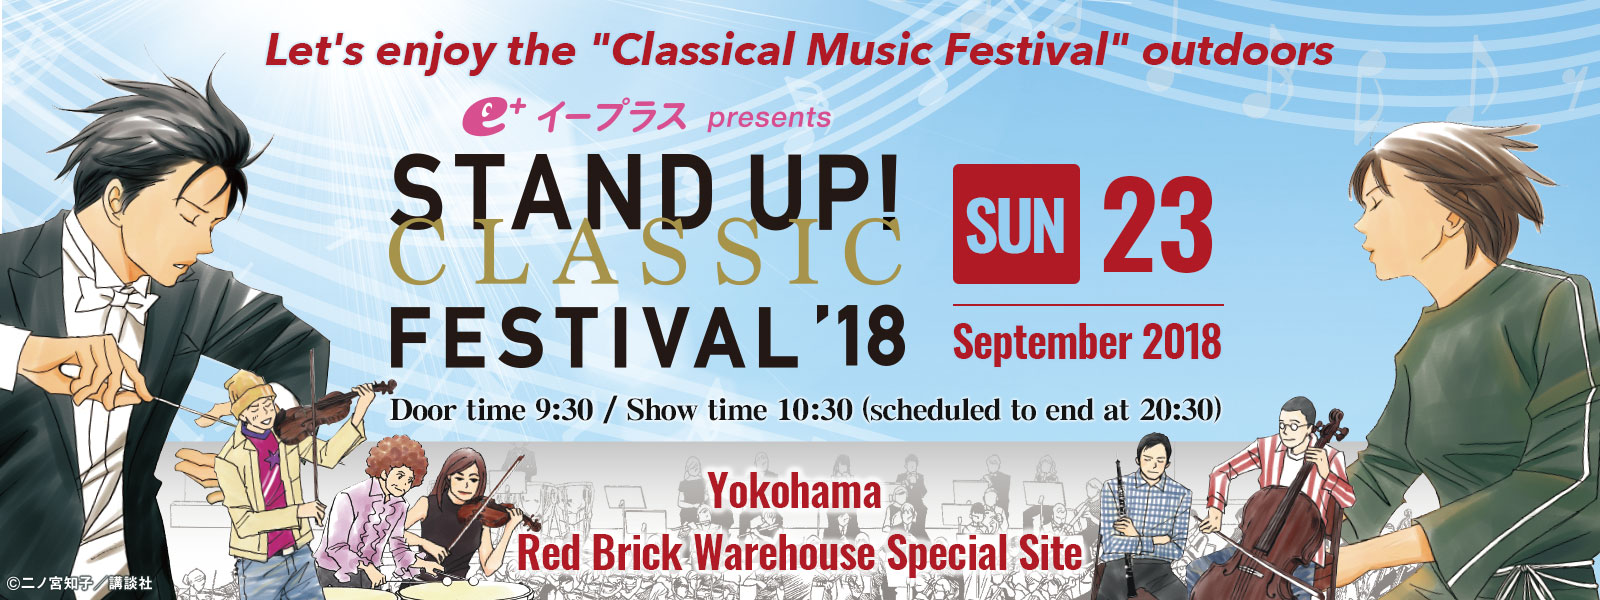 STAND UP! CLASSIC FESTIVAL'18